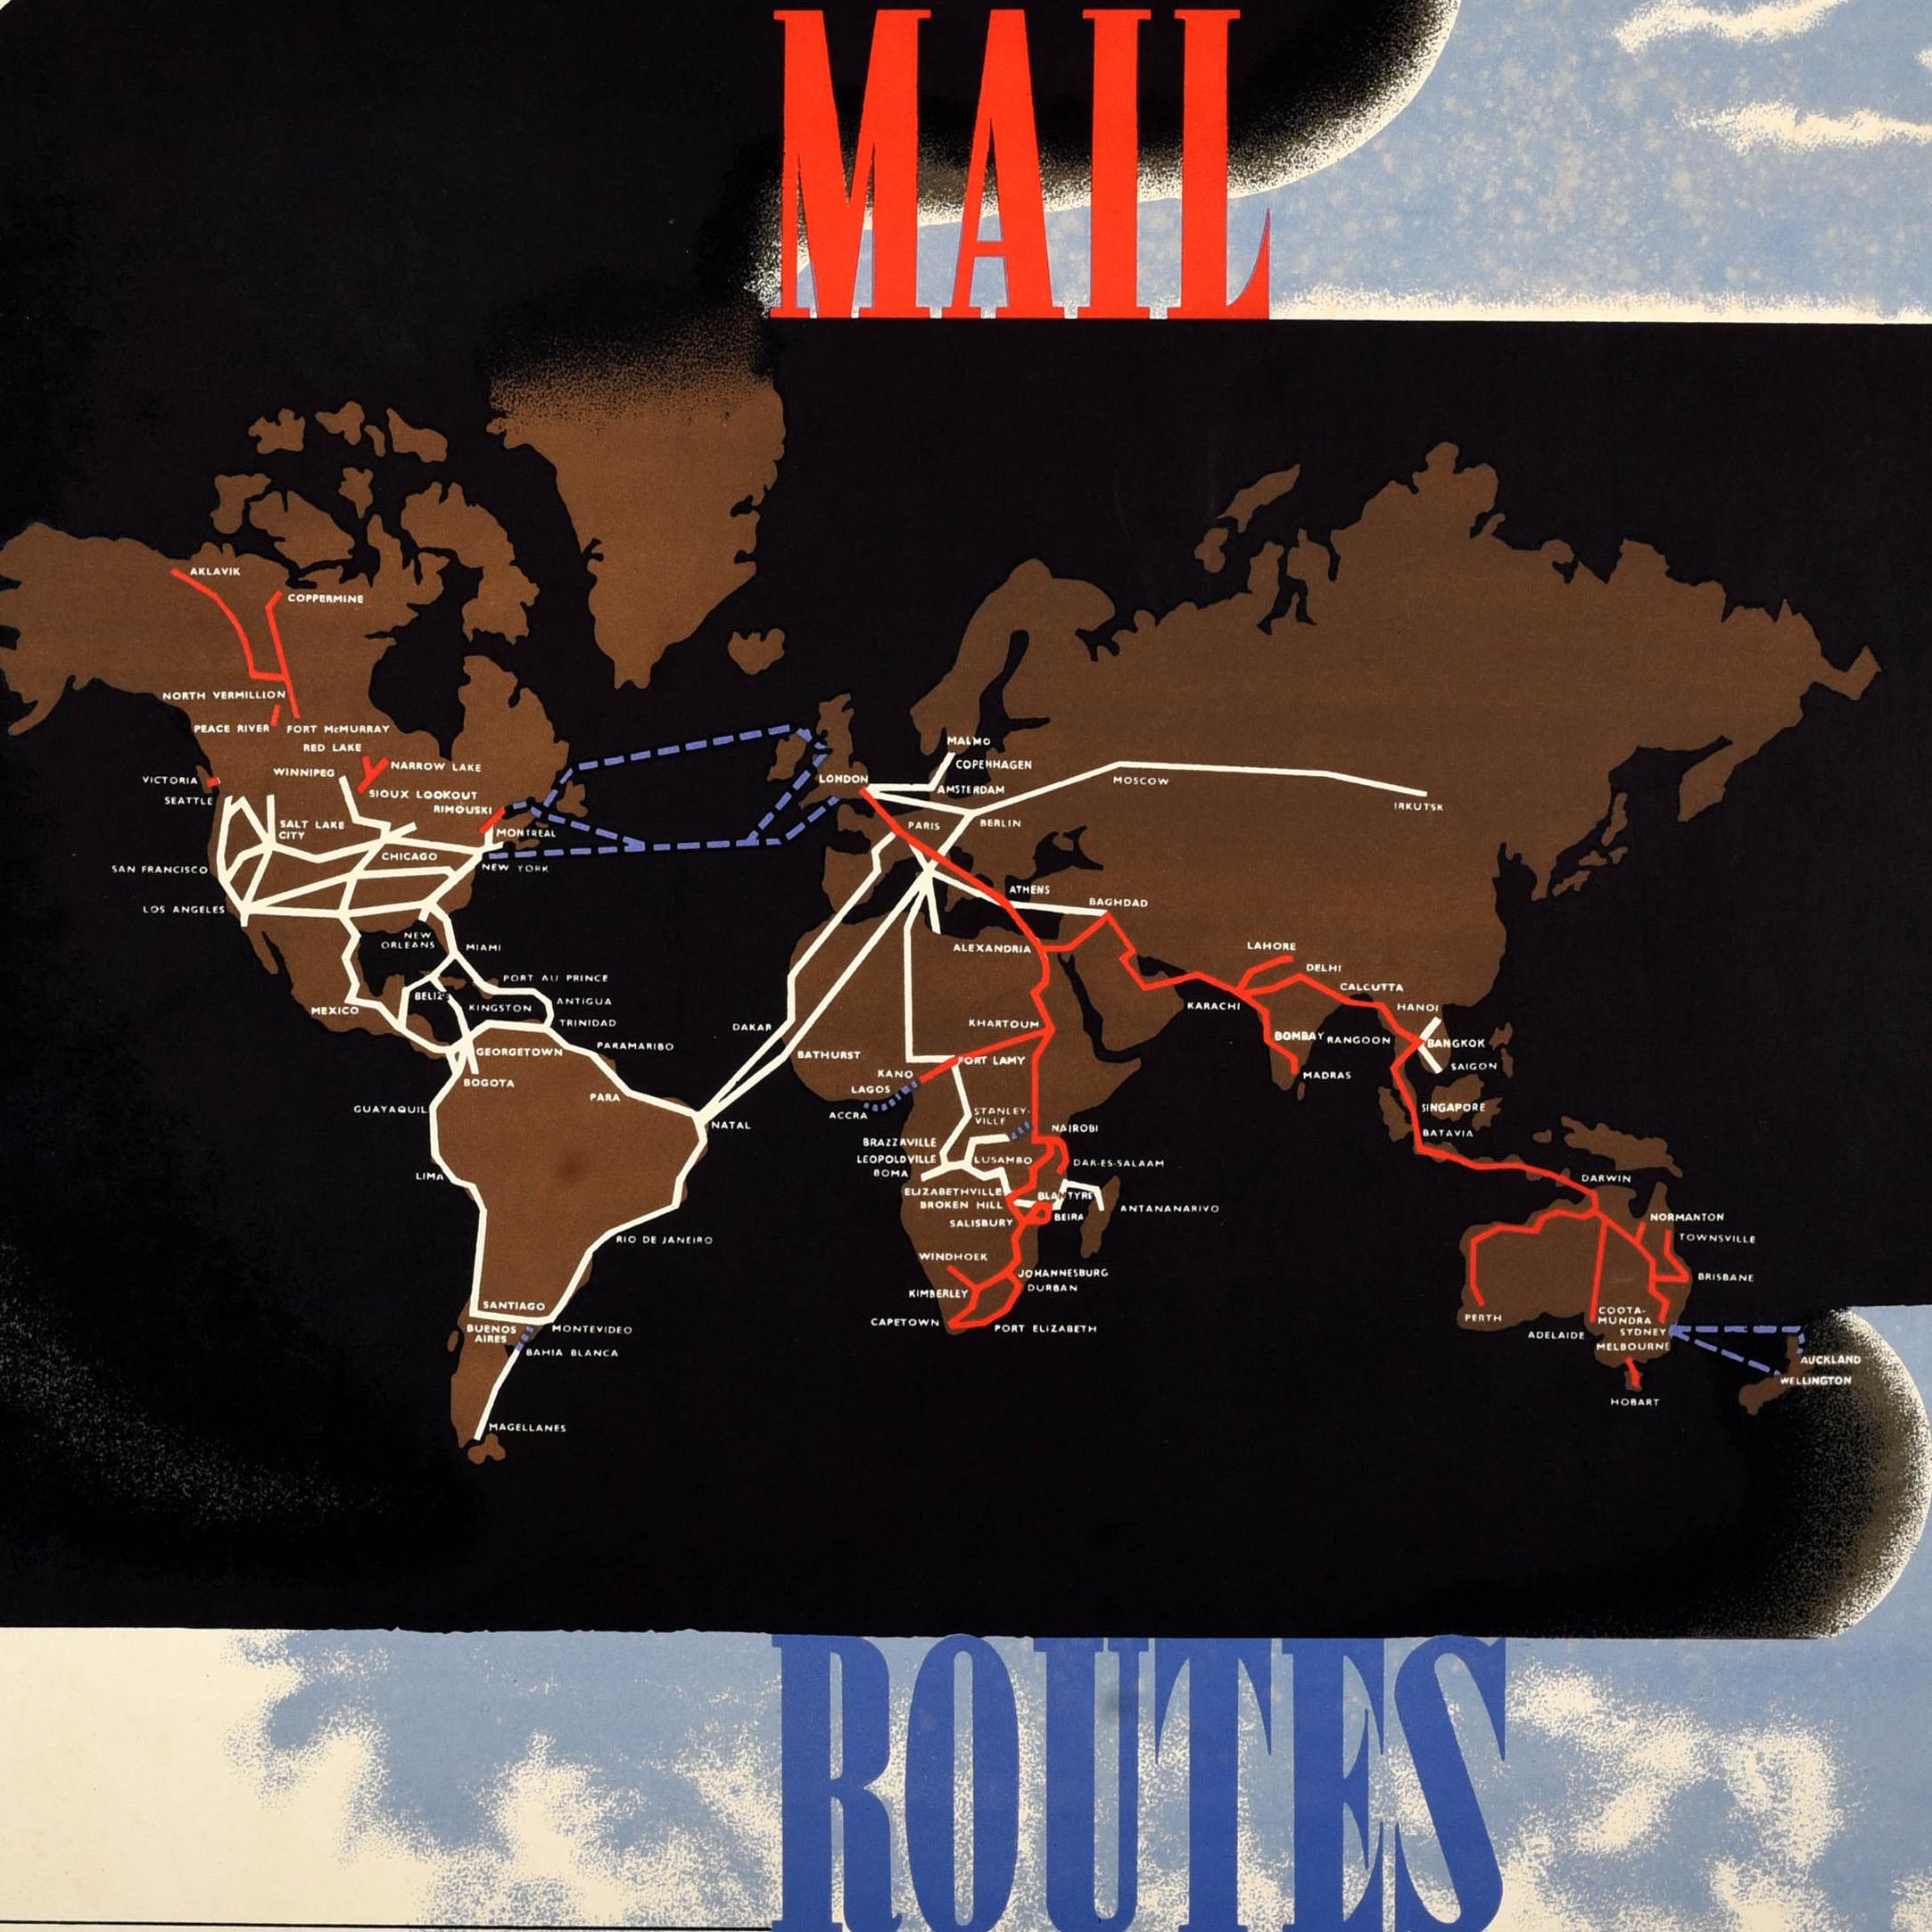 Rare original vintage advertising poster for the GPO General Post Office - Air Mail Routes - featuring a great design by the notable artist Edward McKnight Kauffer (1890-1954) showing the worldwide air mail routes in red, white and blue connecting